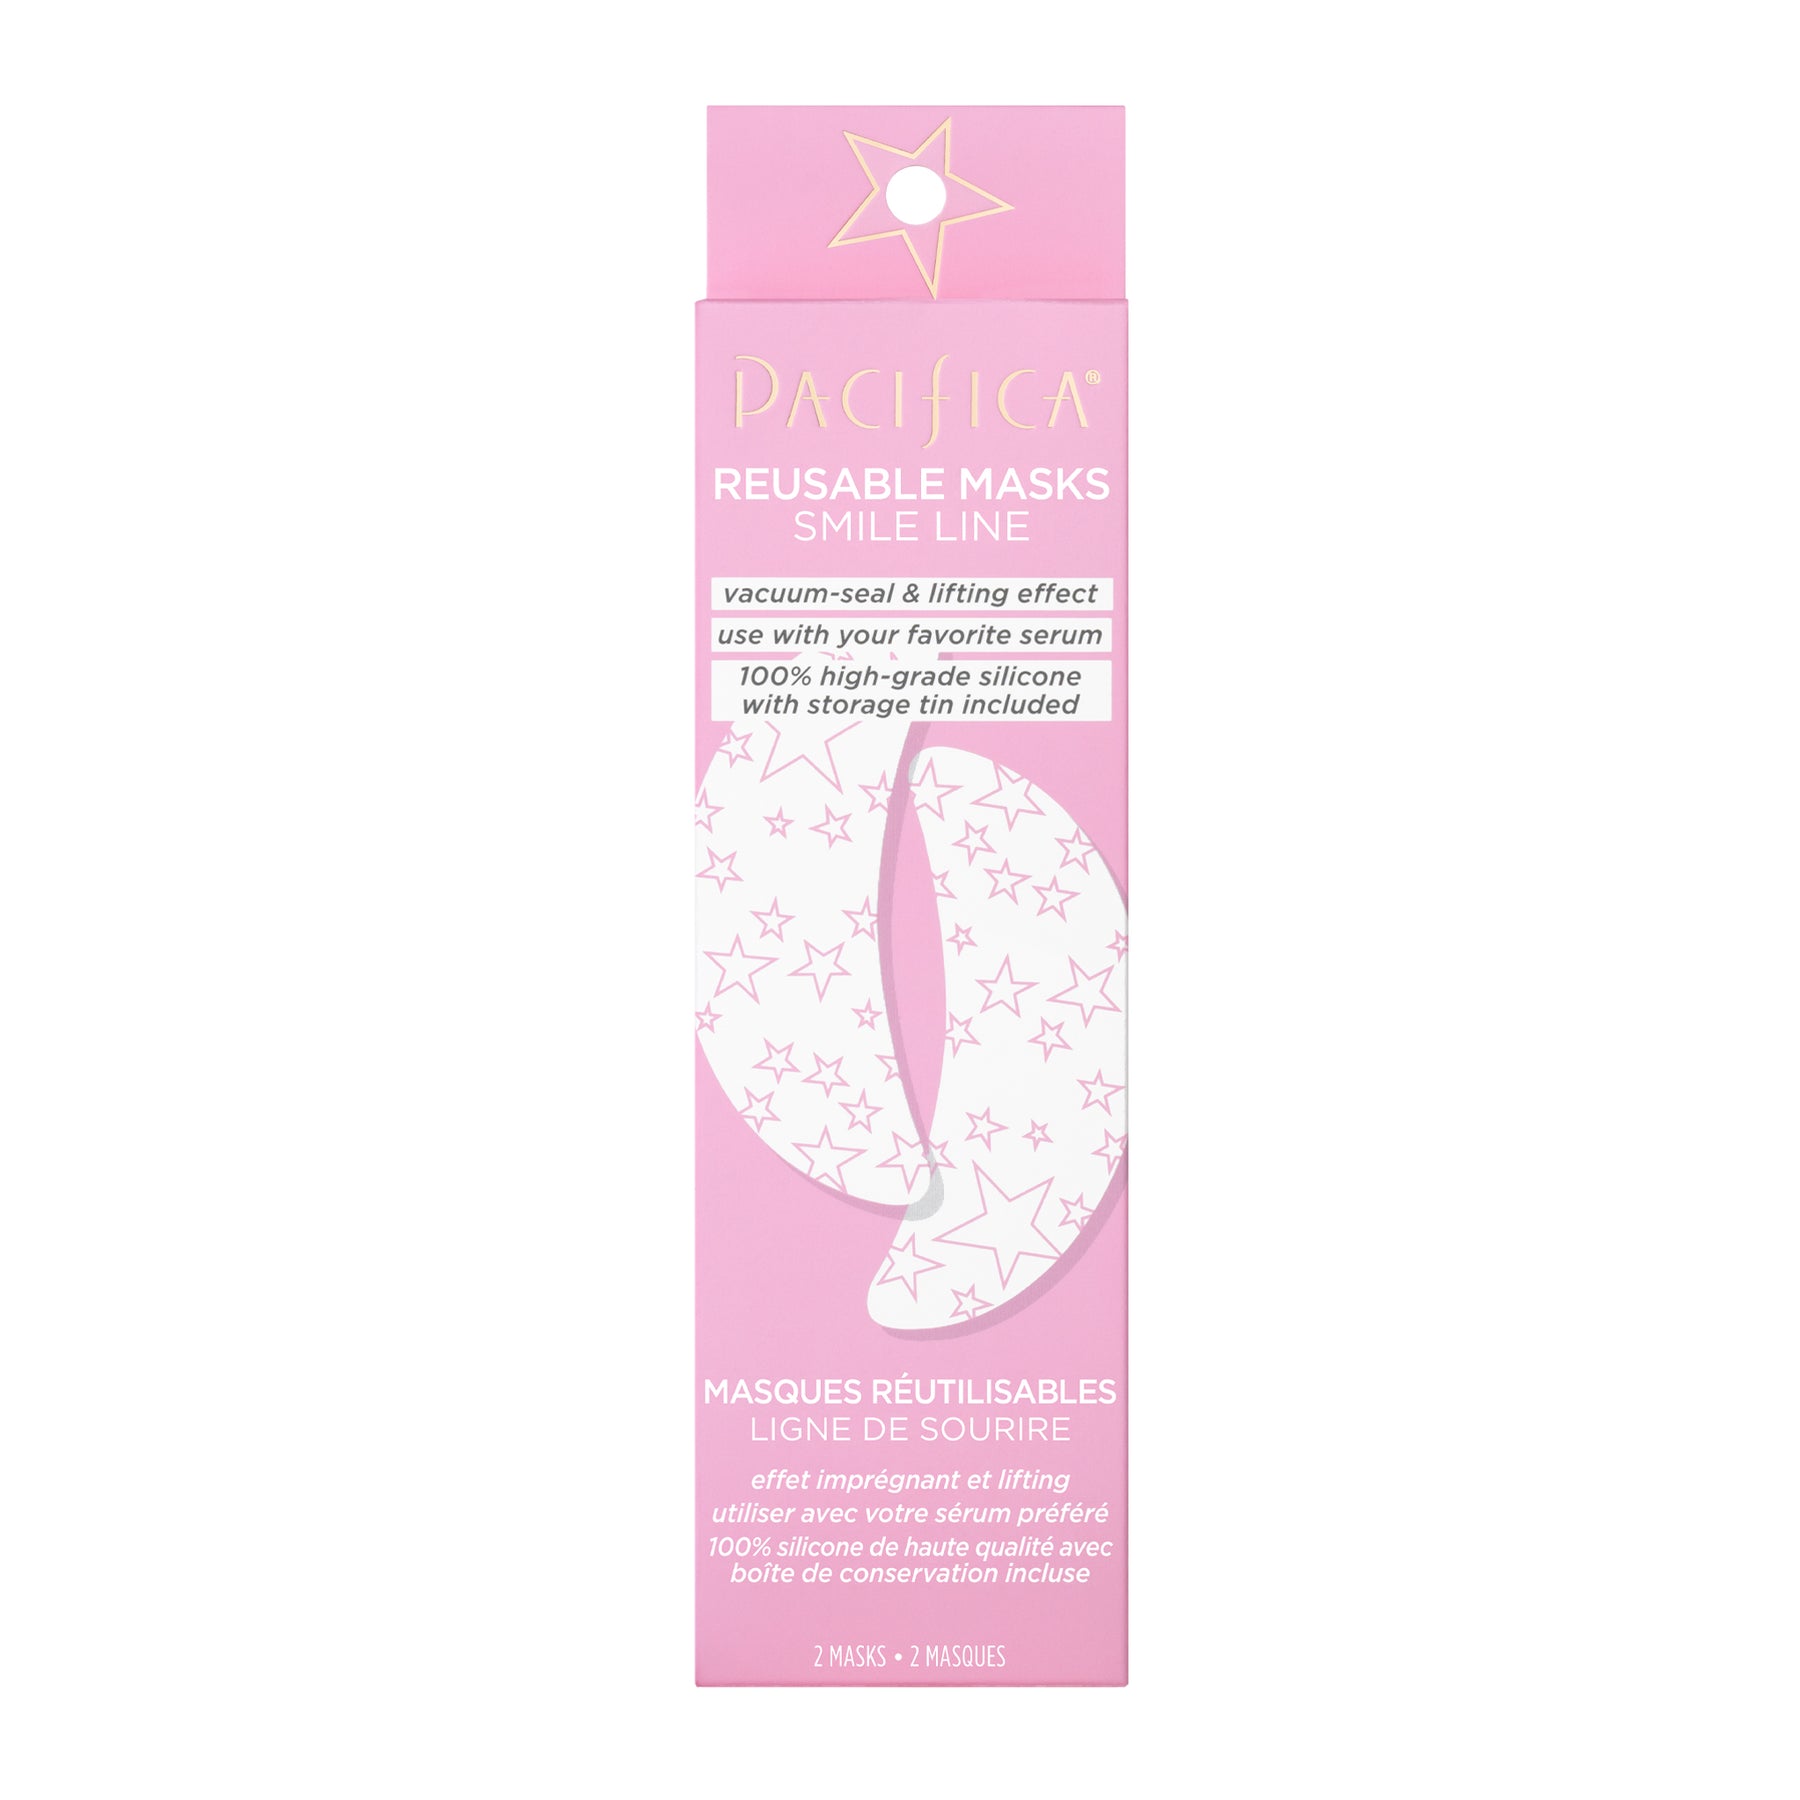 Reusable Masks Smile Line - Skin Care - Pacifica Beauty